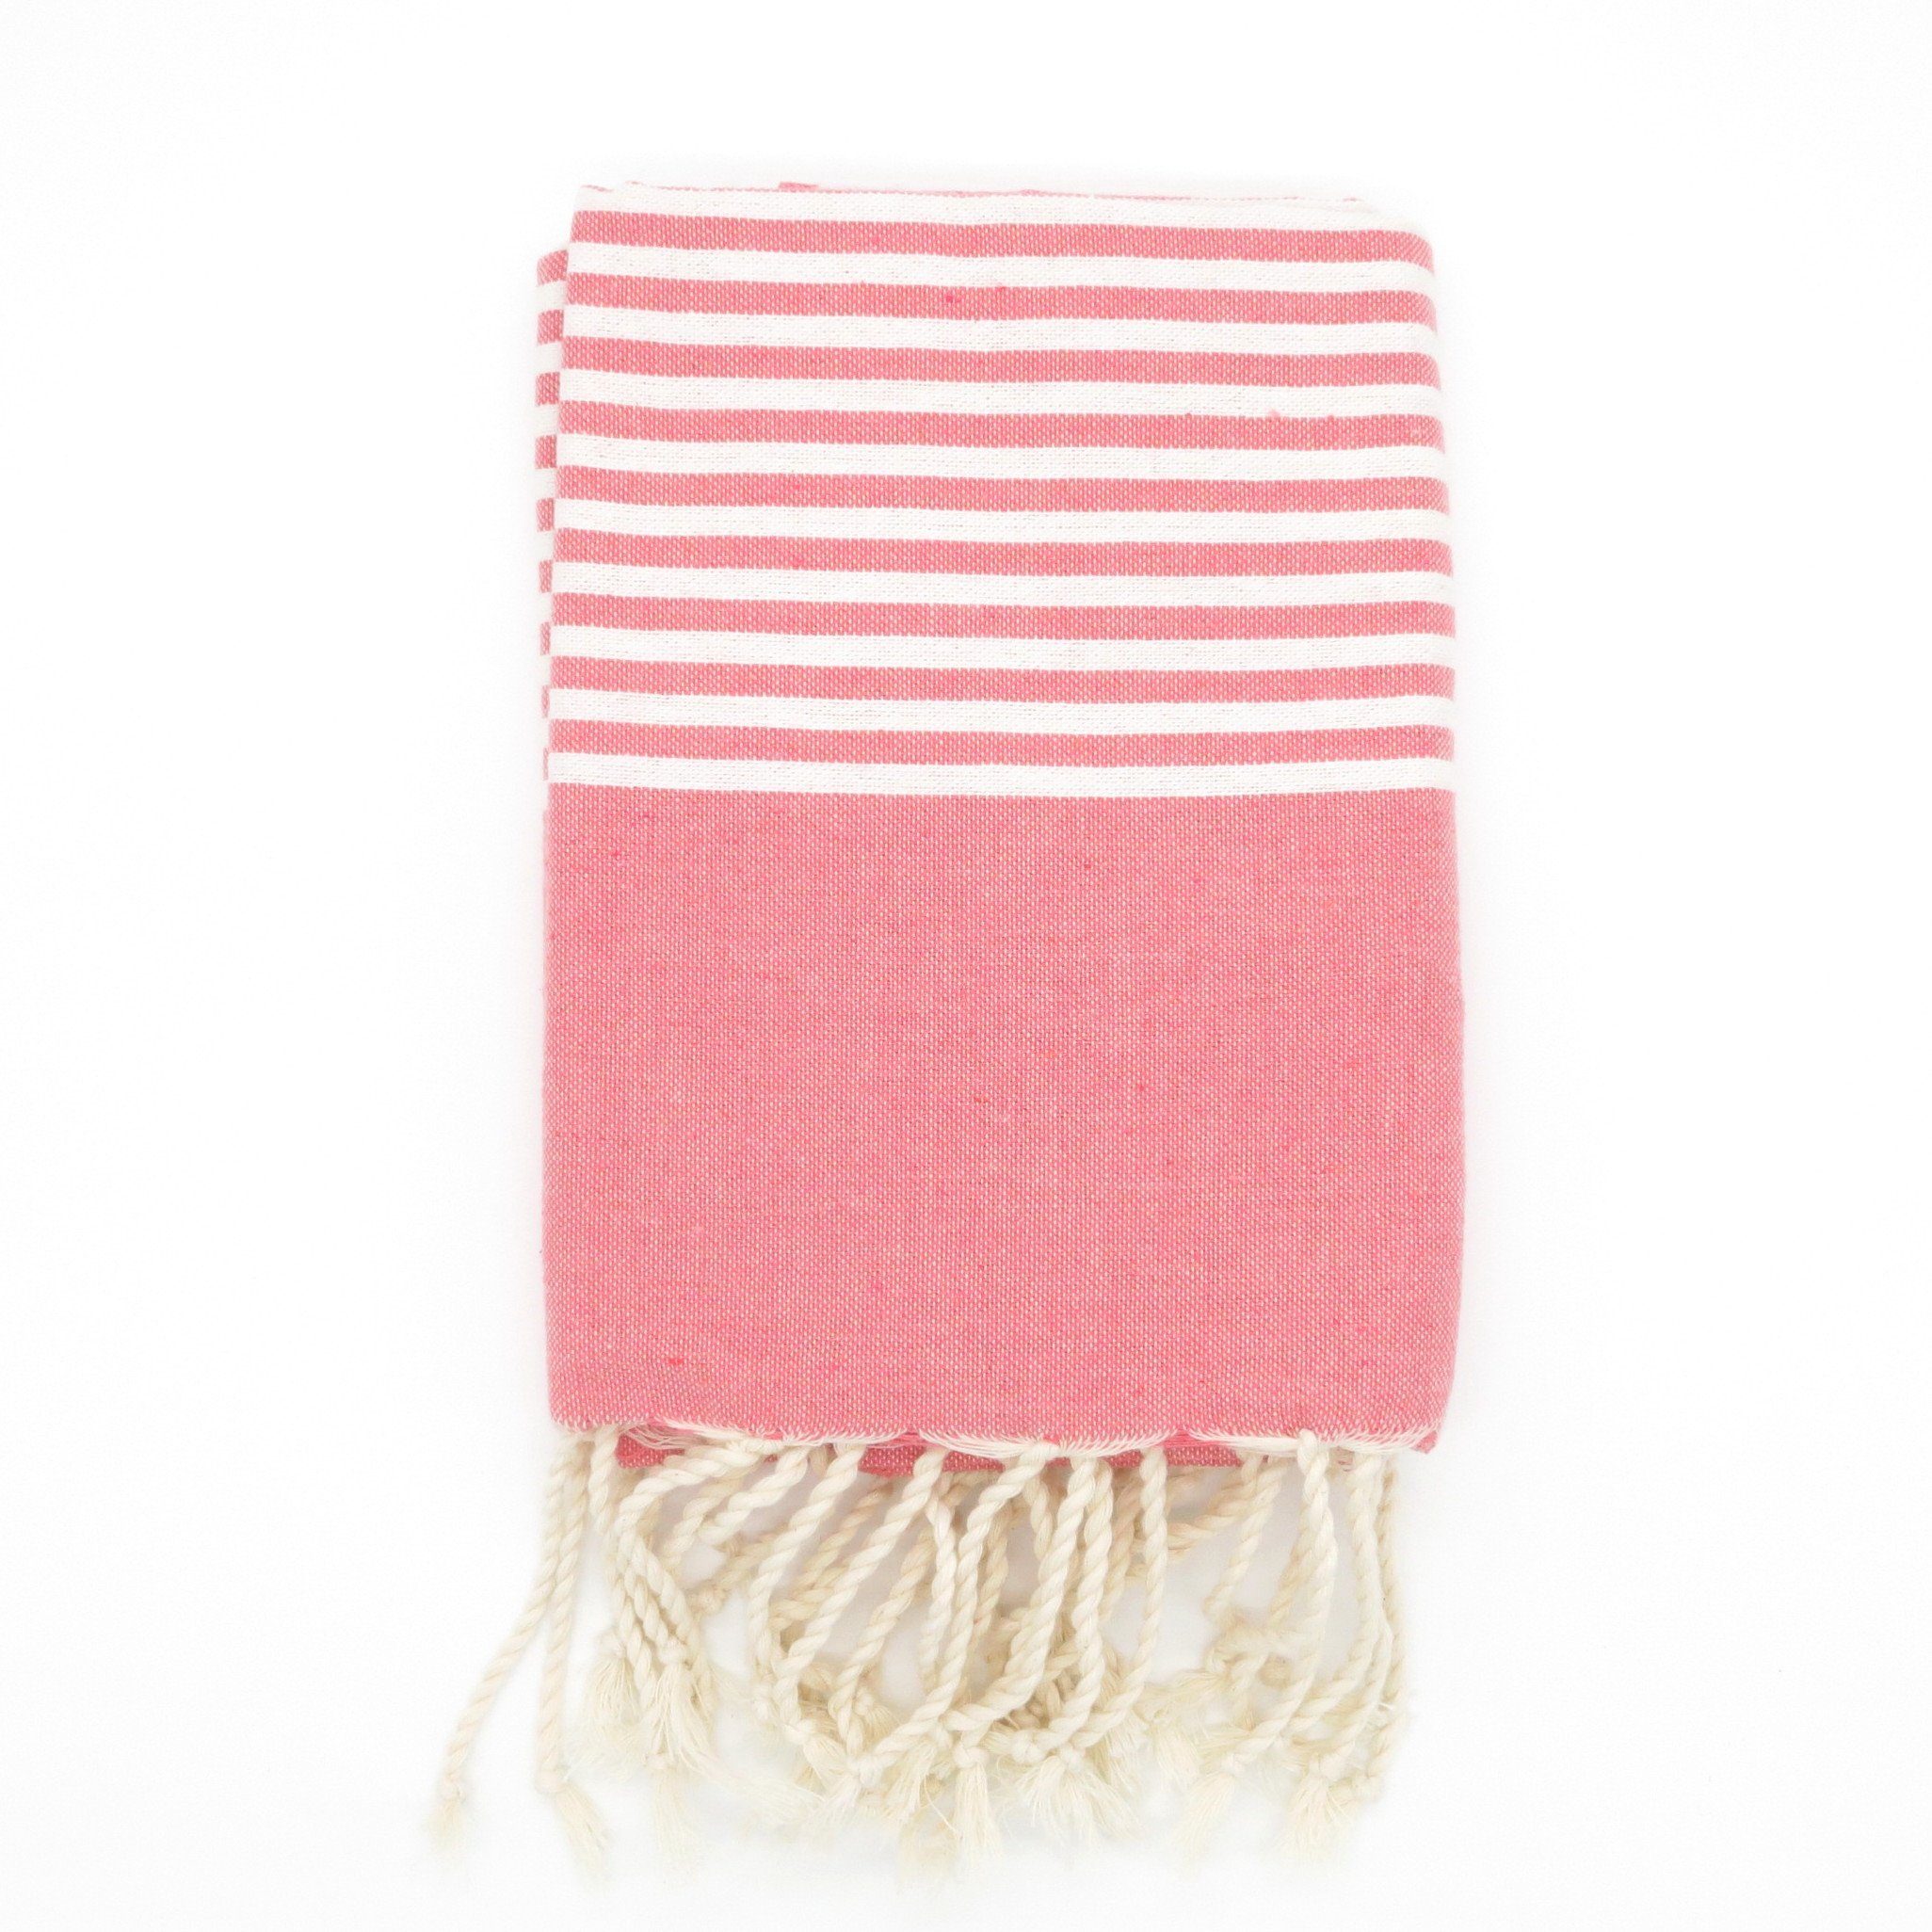 Fouta 100% Koralle Baumwolle Fala, Hamamtuch Cotonway recycling